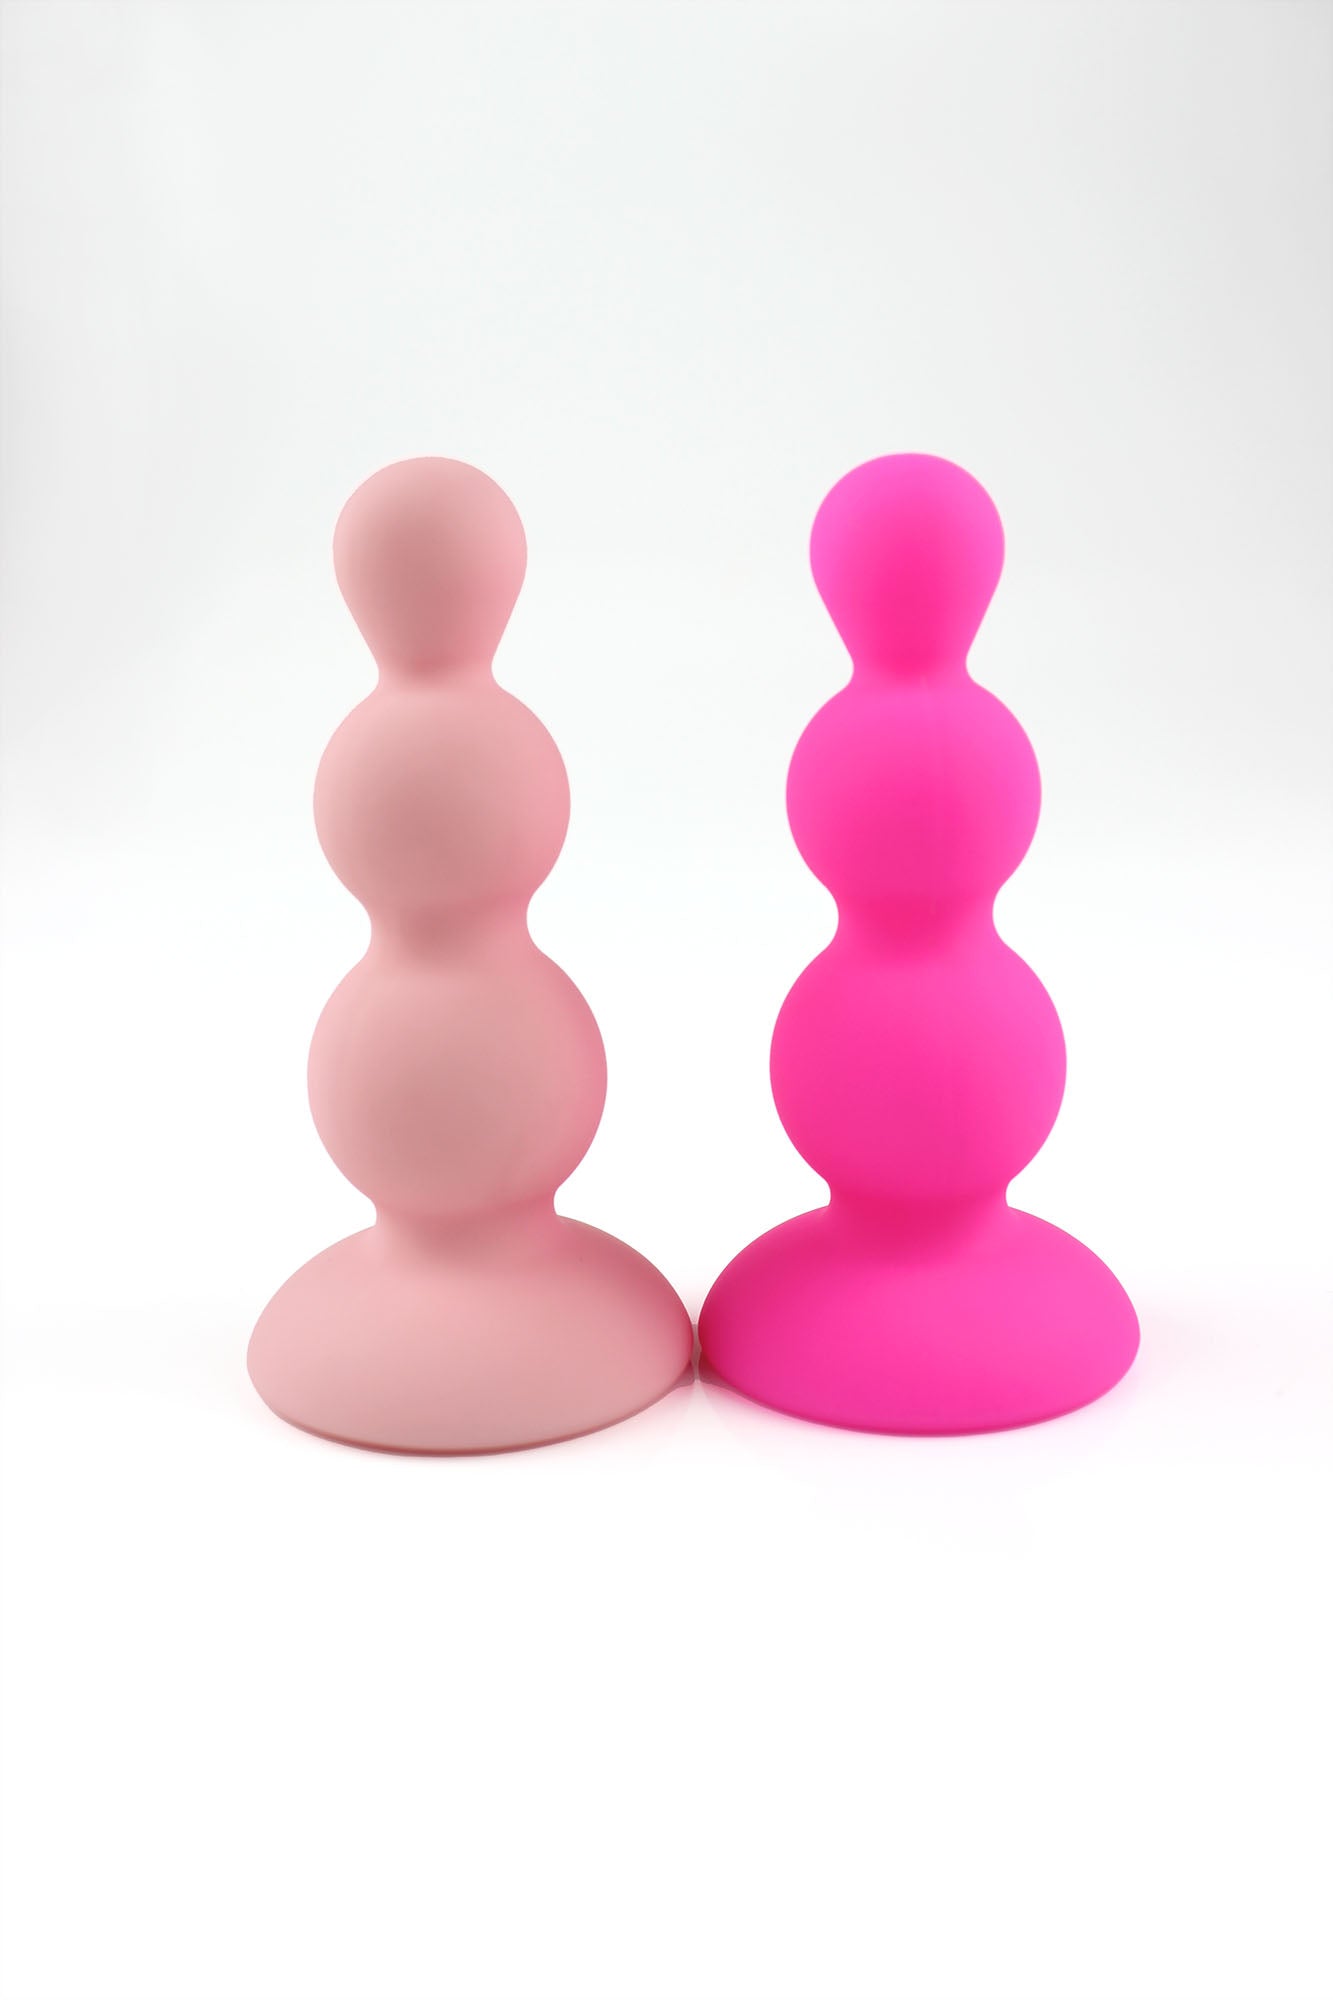 Hot pink beaded gem butt plug and peach pink beaded gem butt plug stood upright on white background